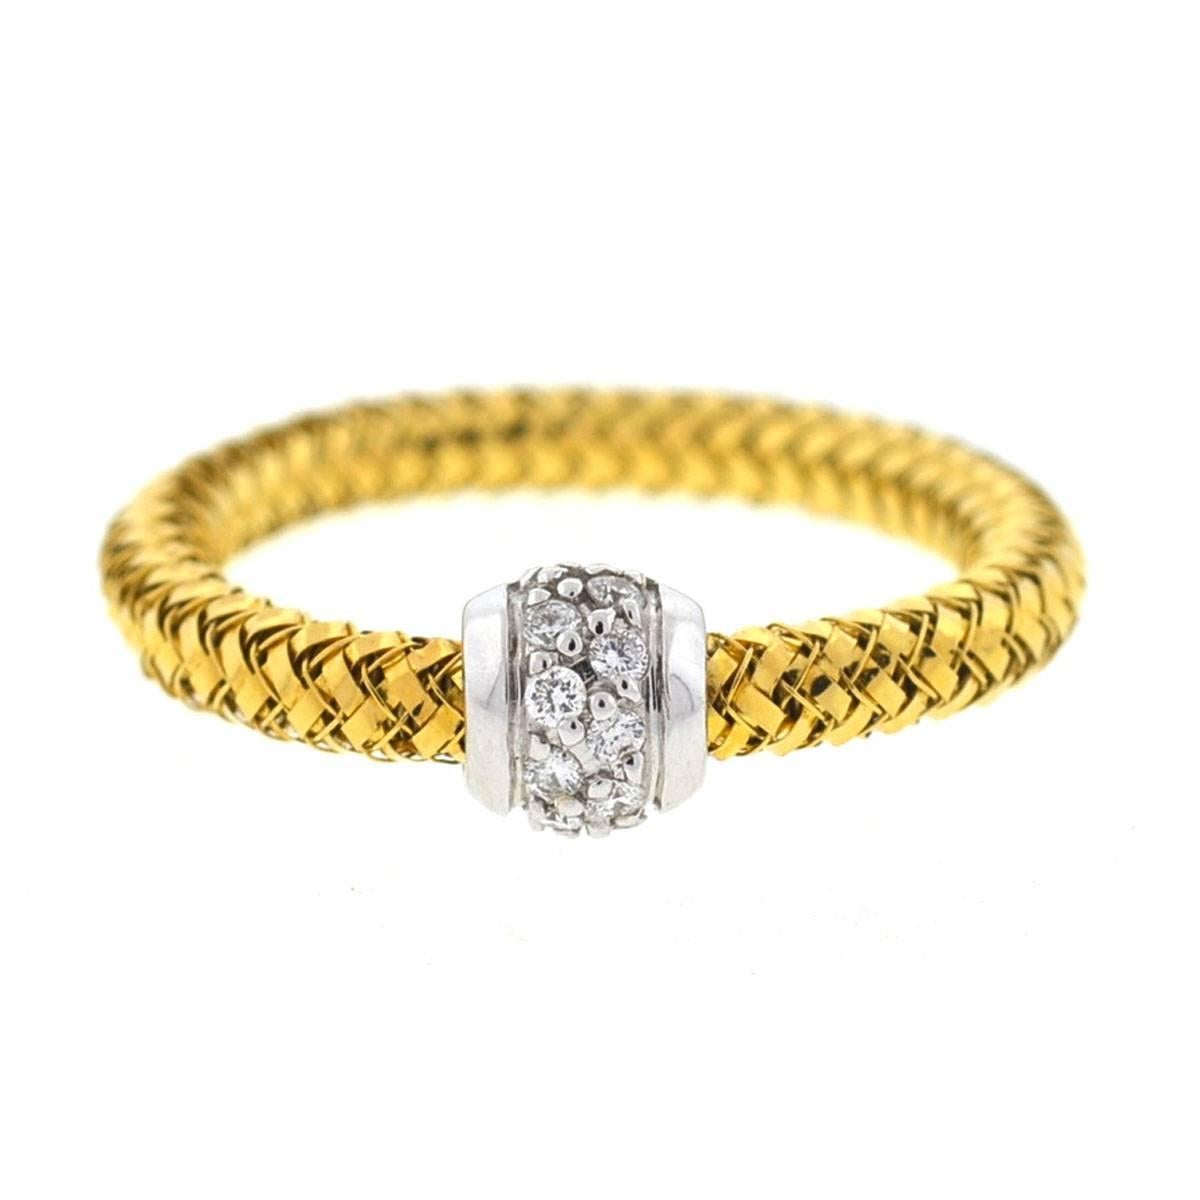 Company - Roberto Coin
Style - Primavera Flexible Ring w/ Diamonds
Metal - 18k Yellow Gold
Stones - Diamonds Approx. .10 ctw
Weight - 2.2 G
Size - 6
Includes - Ring Only
5628-5uee